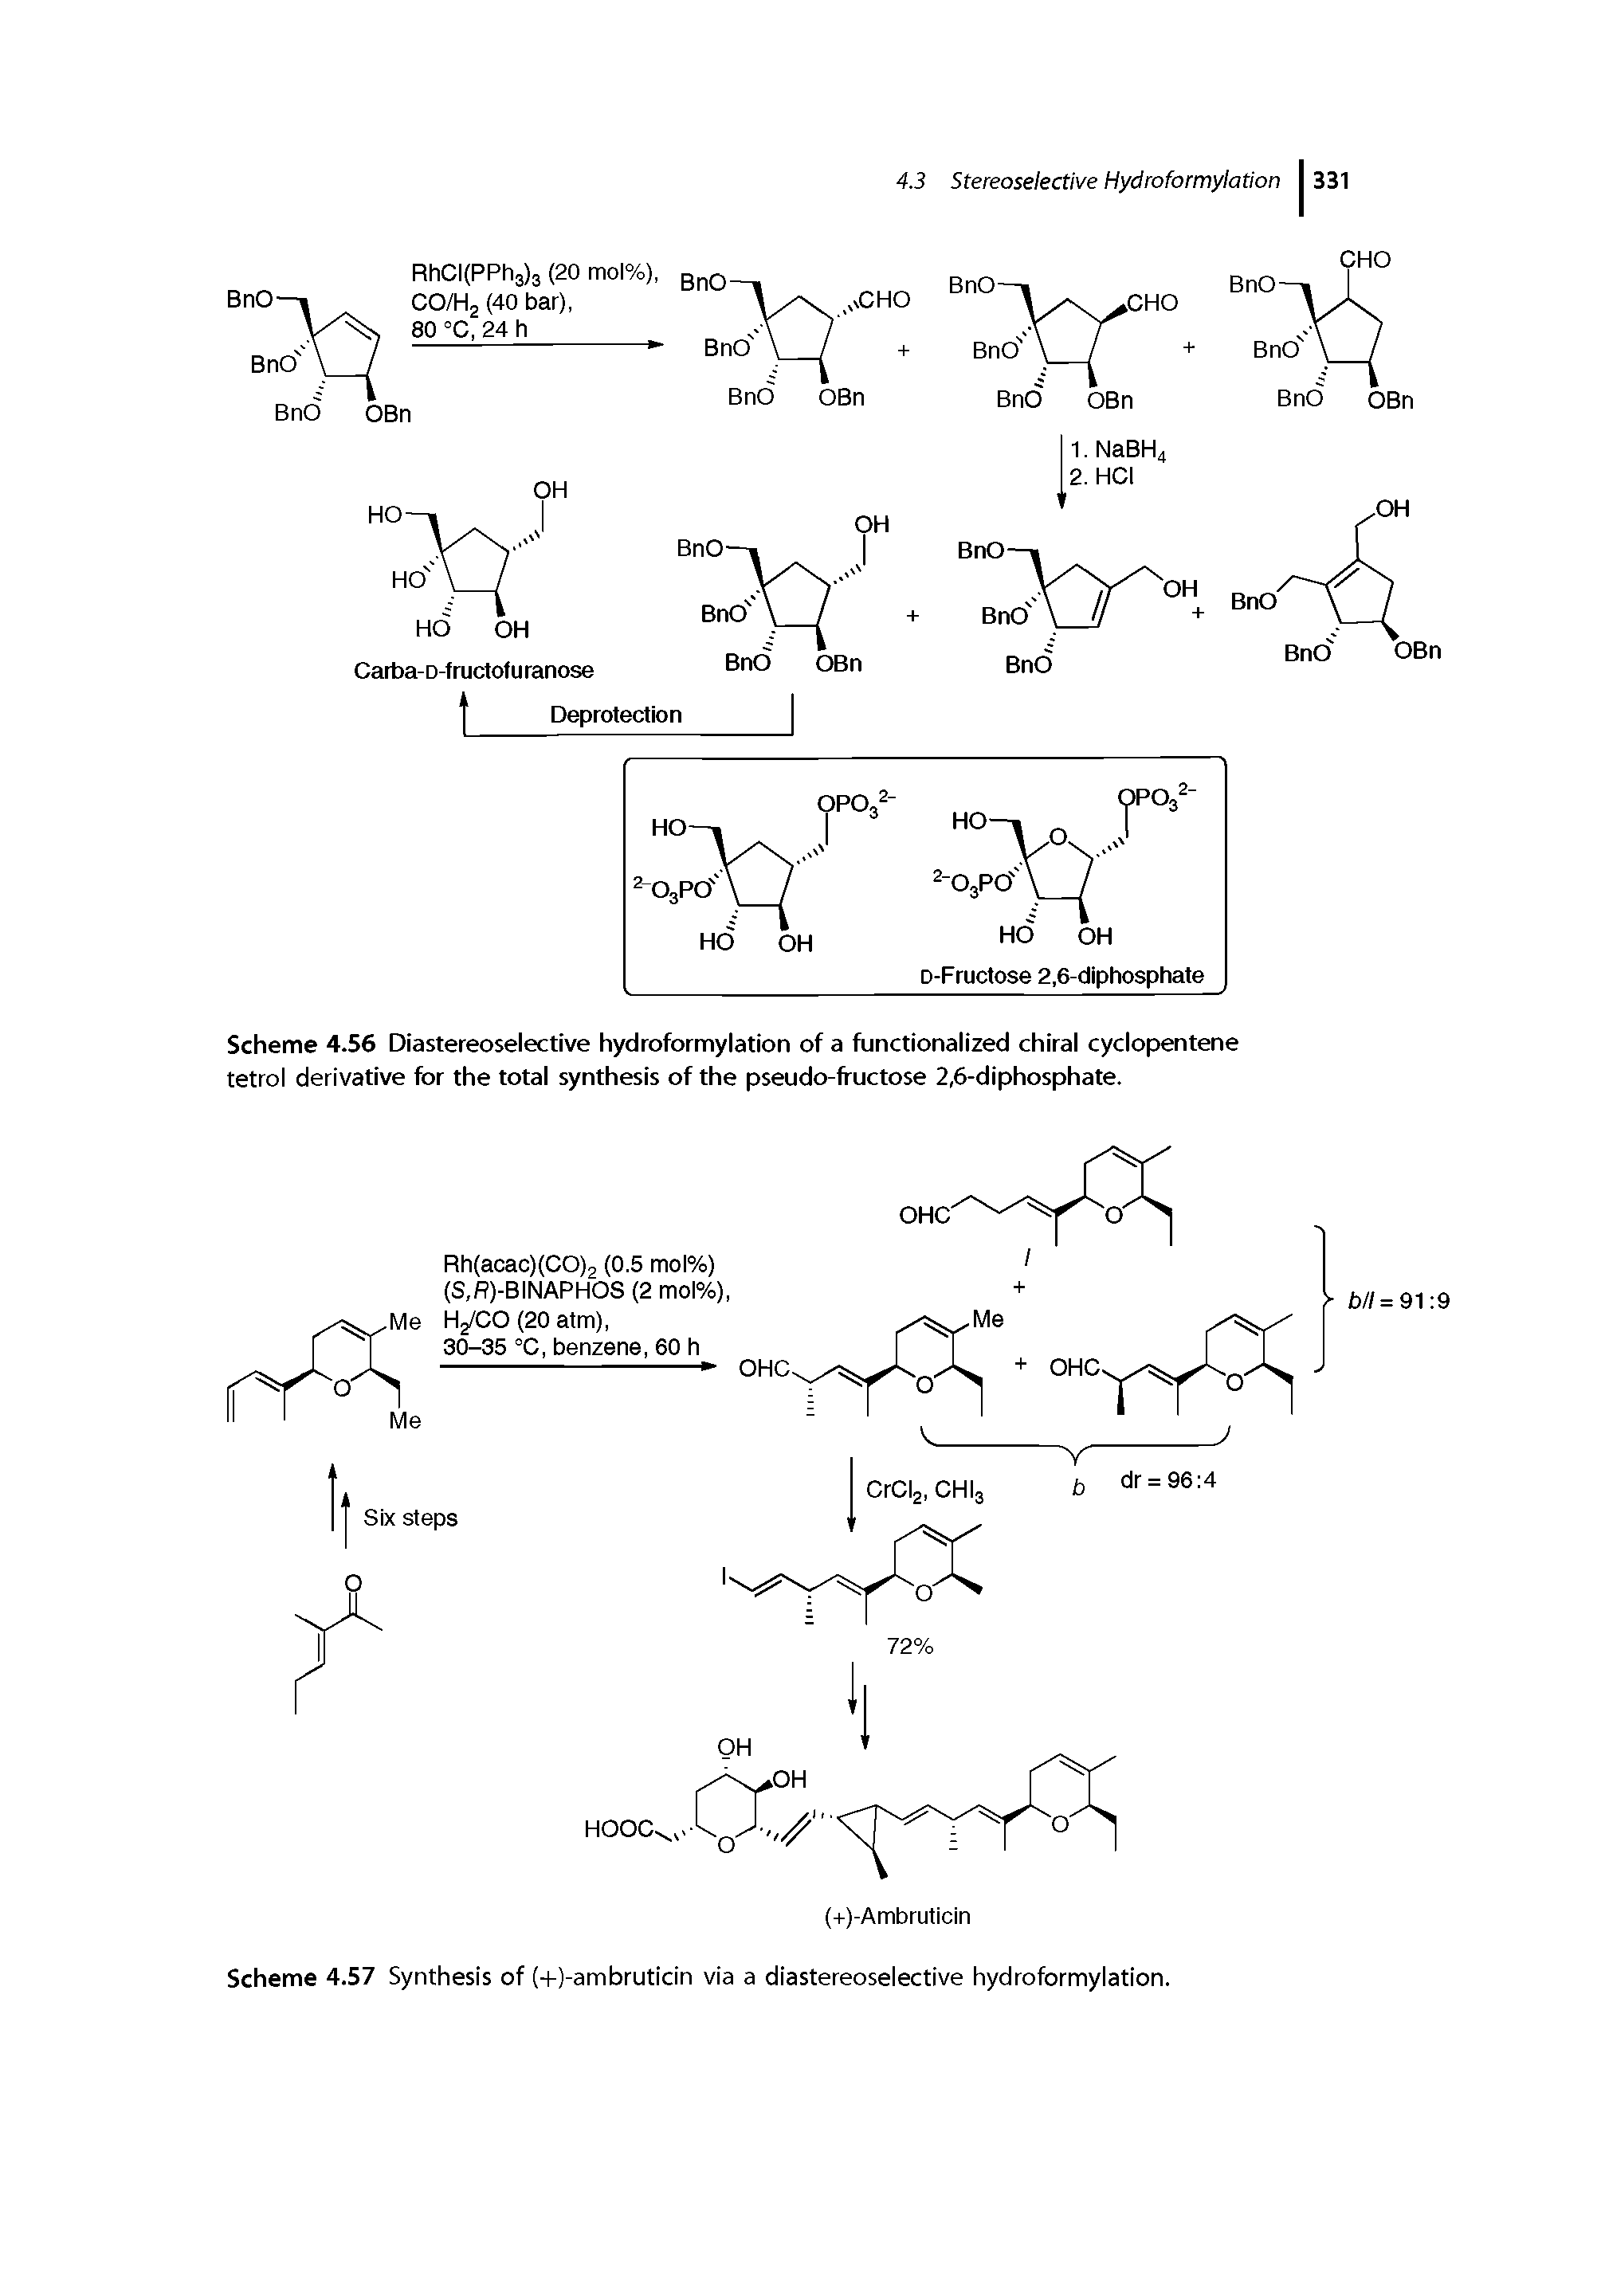 Scheme 4.56 Diastereoselective hydroformylation of a functionalized chiral cyclopentene tetrol derivative for the total synthesis of the pseudo-fructose 2,6-diphosphate.